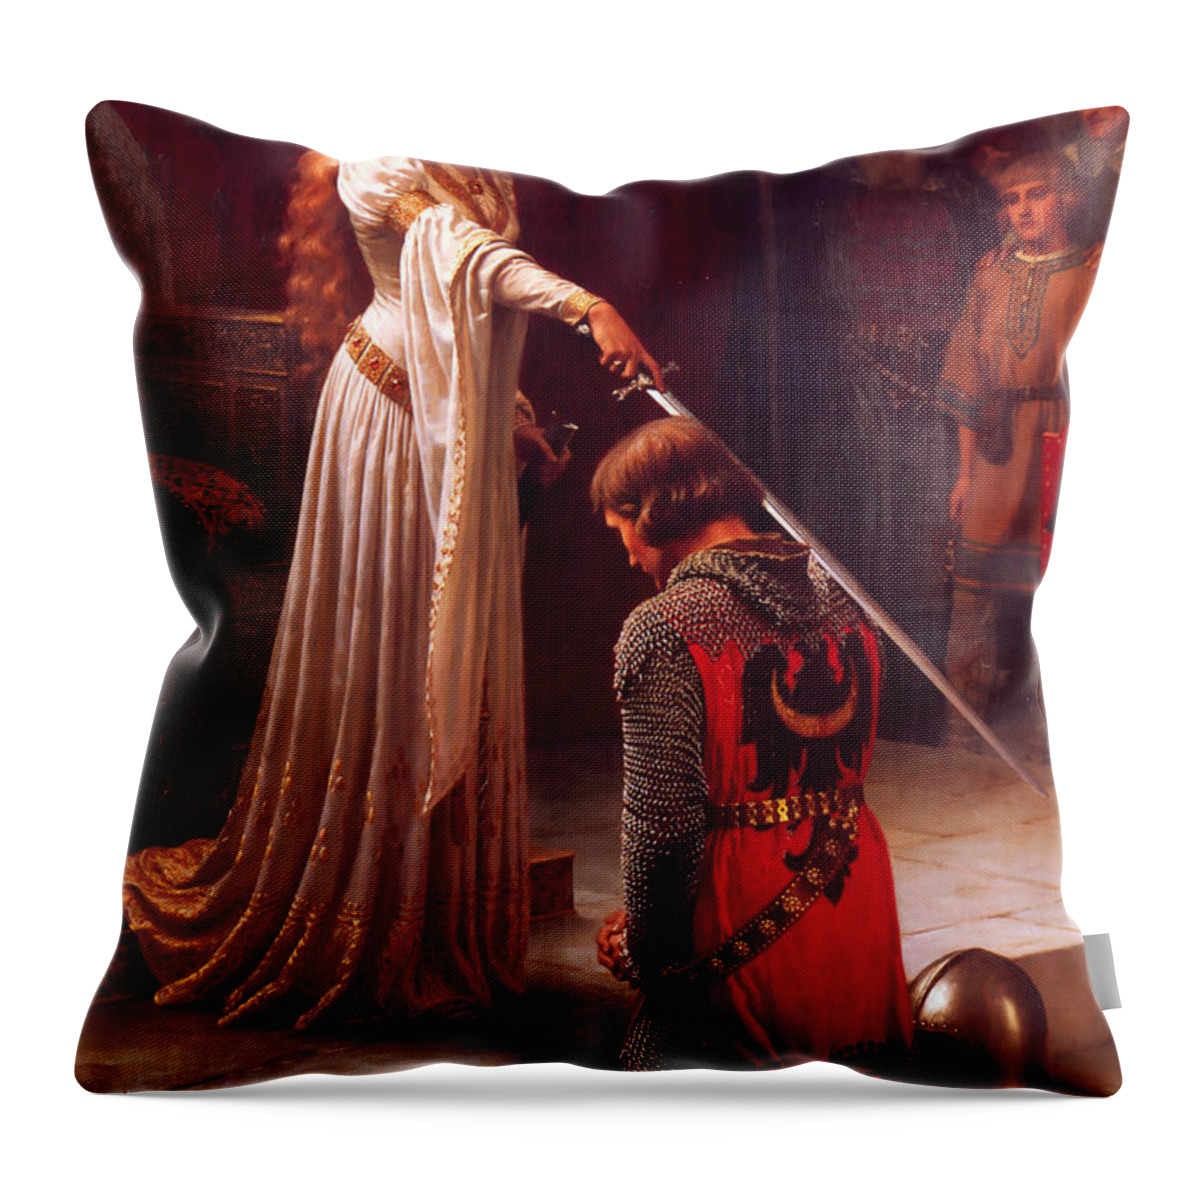 Edmund Blair Leighton Accolade Knighthood Middle Ages Medieval Royal Academy English Romanticism Pre-raphaelite Throw Pillow featuring the painting Accolade by Troy Caperton